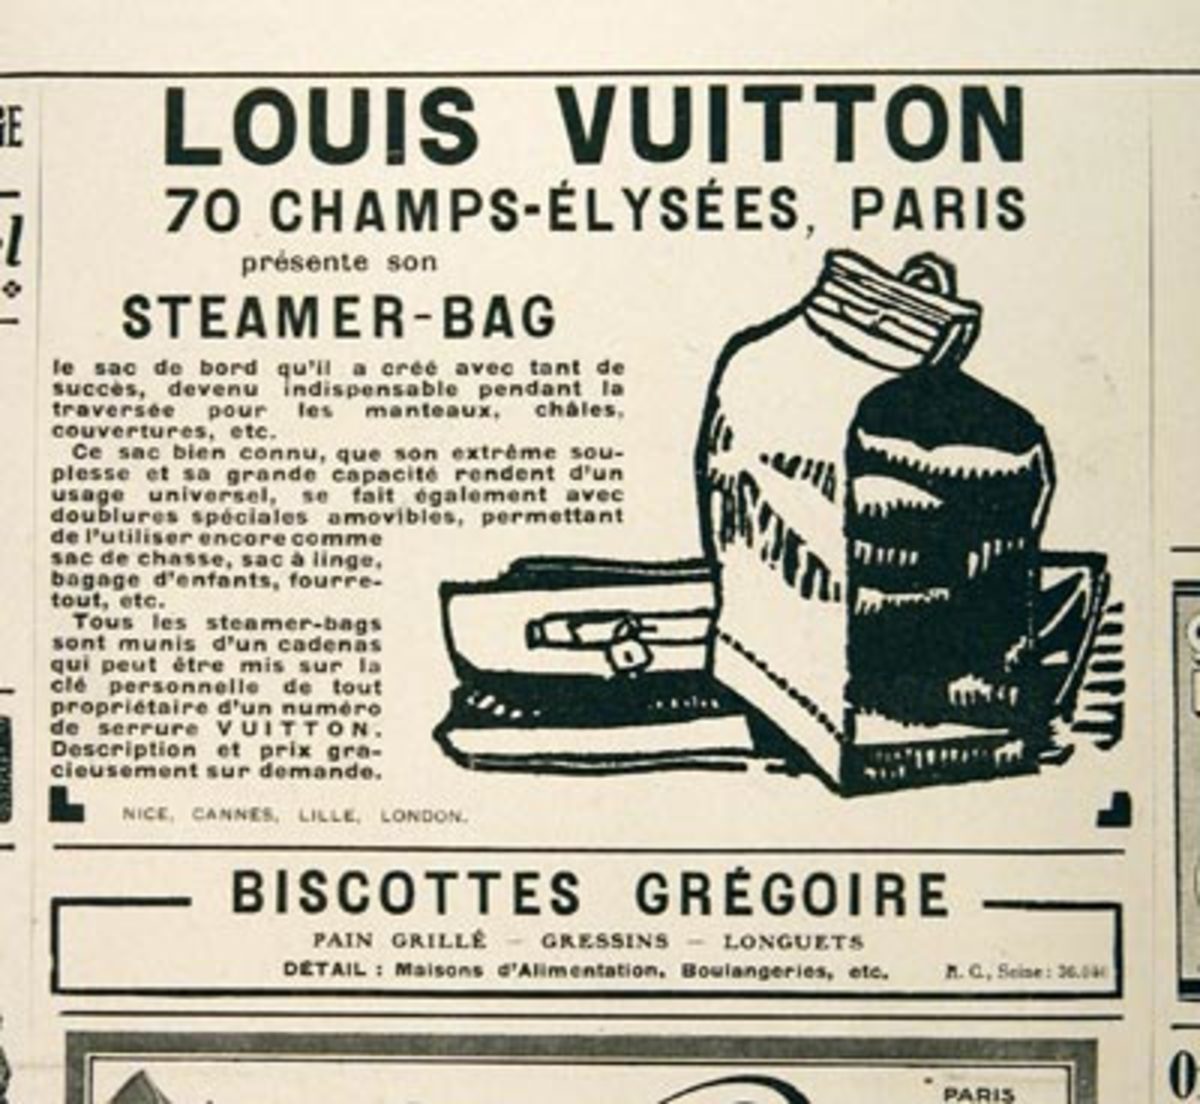 Louis Vuitton Bags and Suitcases Original Vintage Poster 1927 -  UK